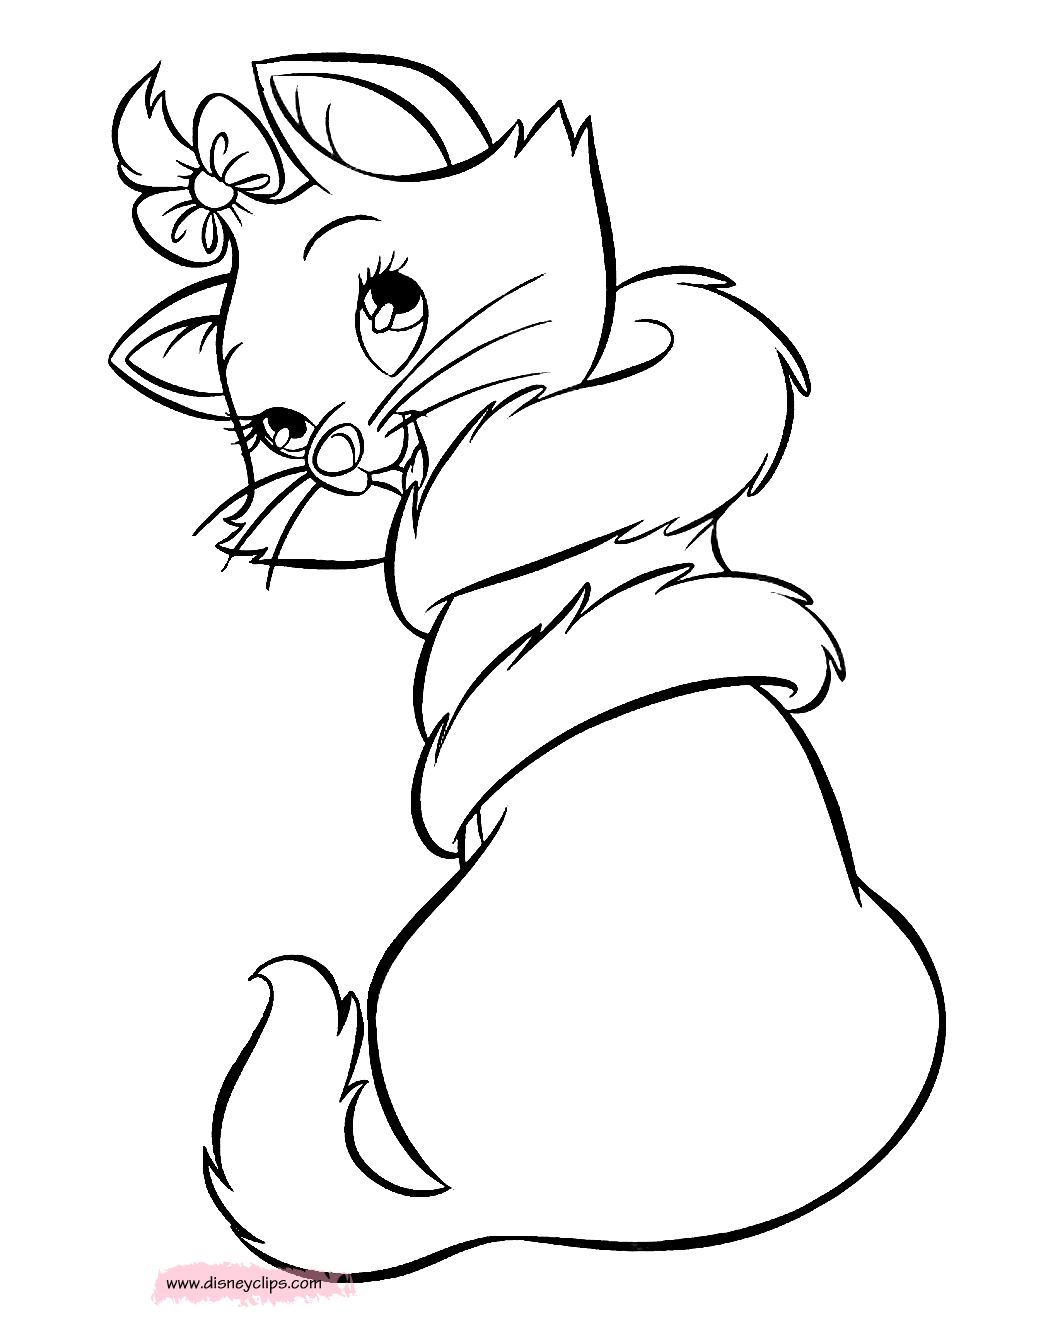 The Aristocats Printable Coloring Pages | Disney Coloring Book